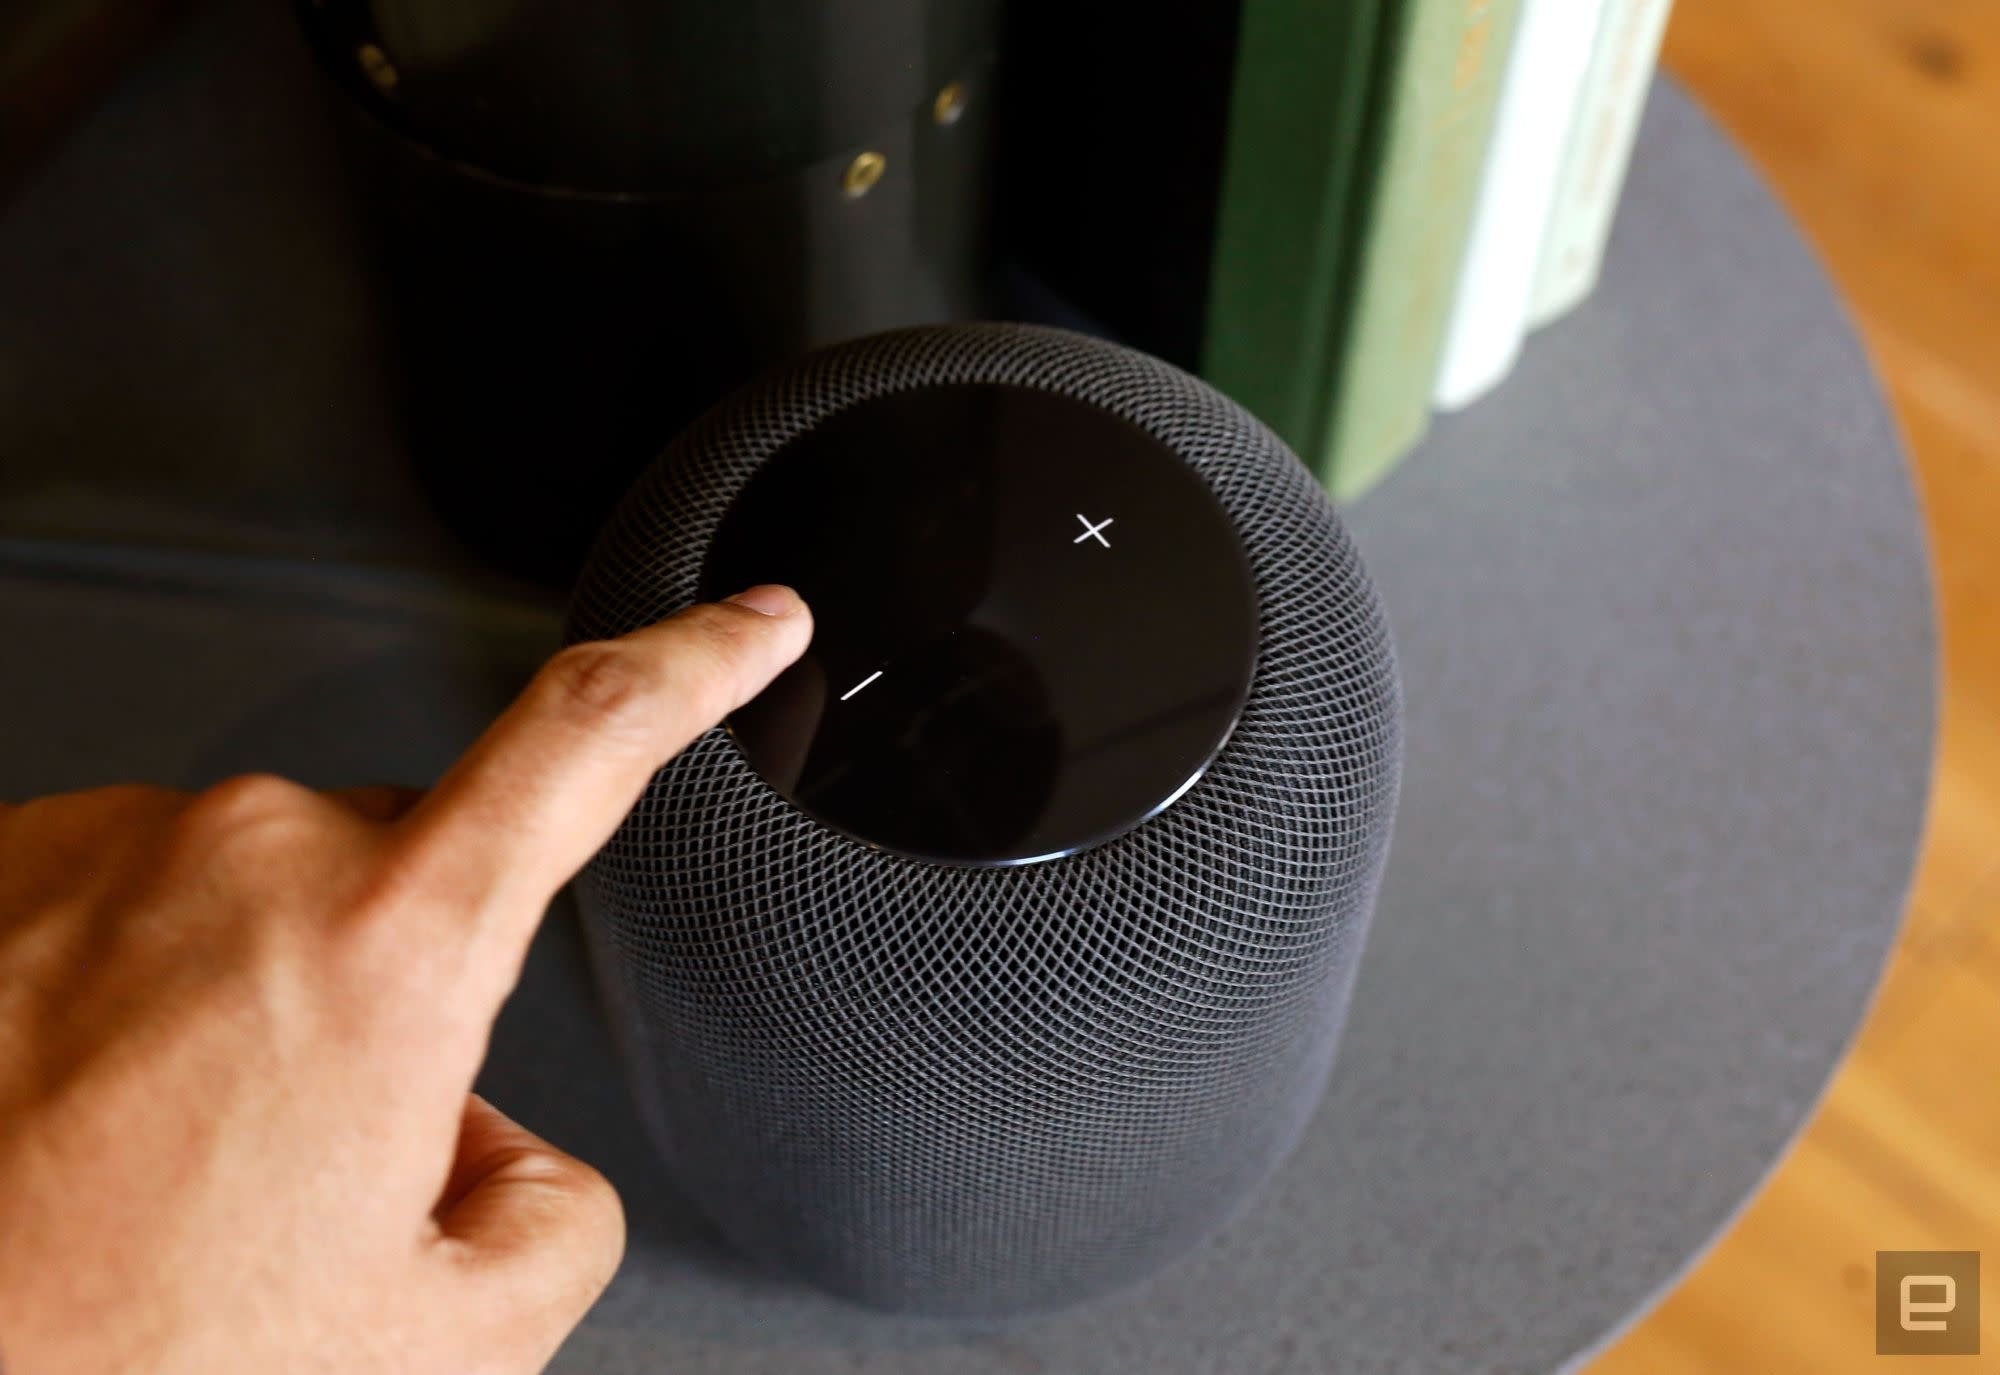 Apple gives up its original HomePod in favor of the $ 99 mini